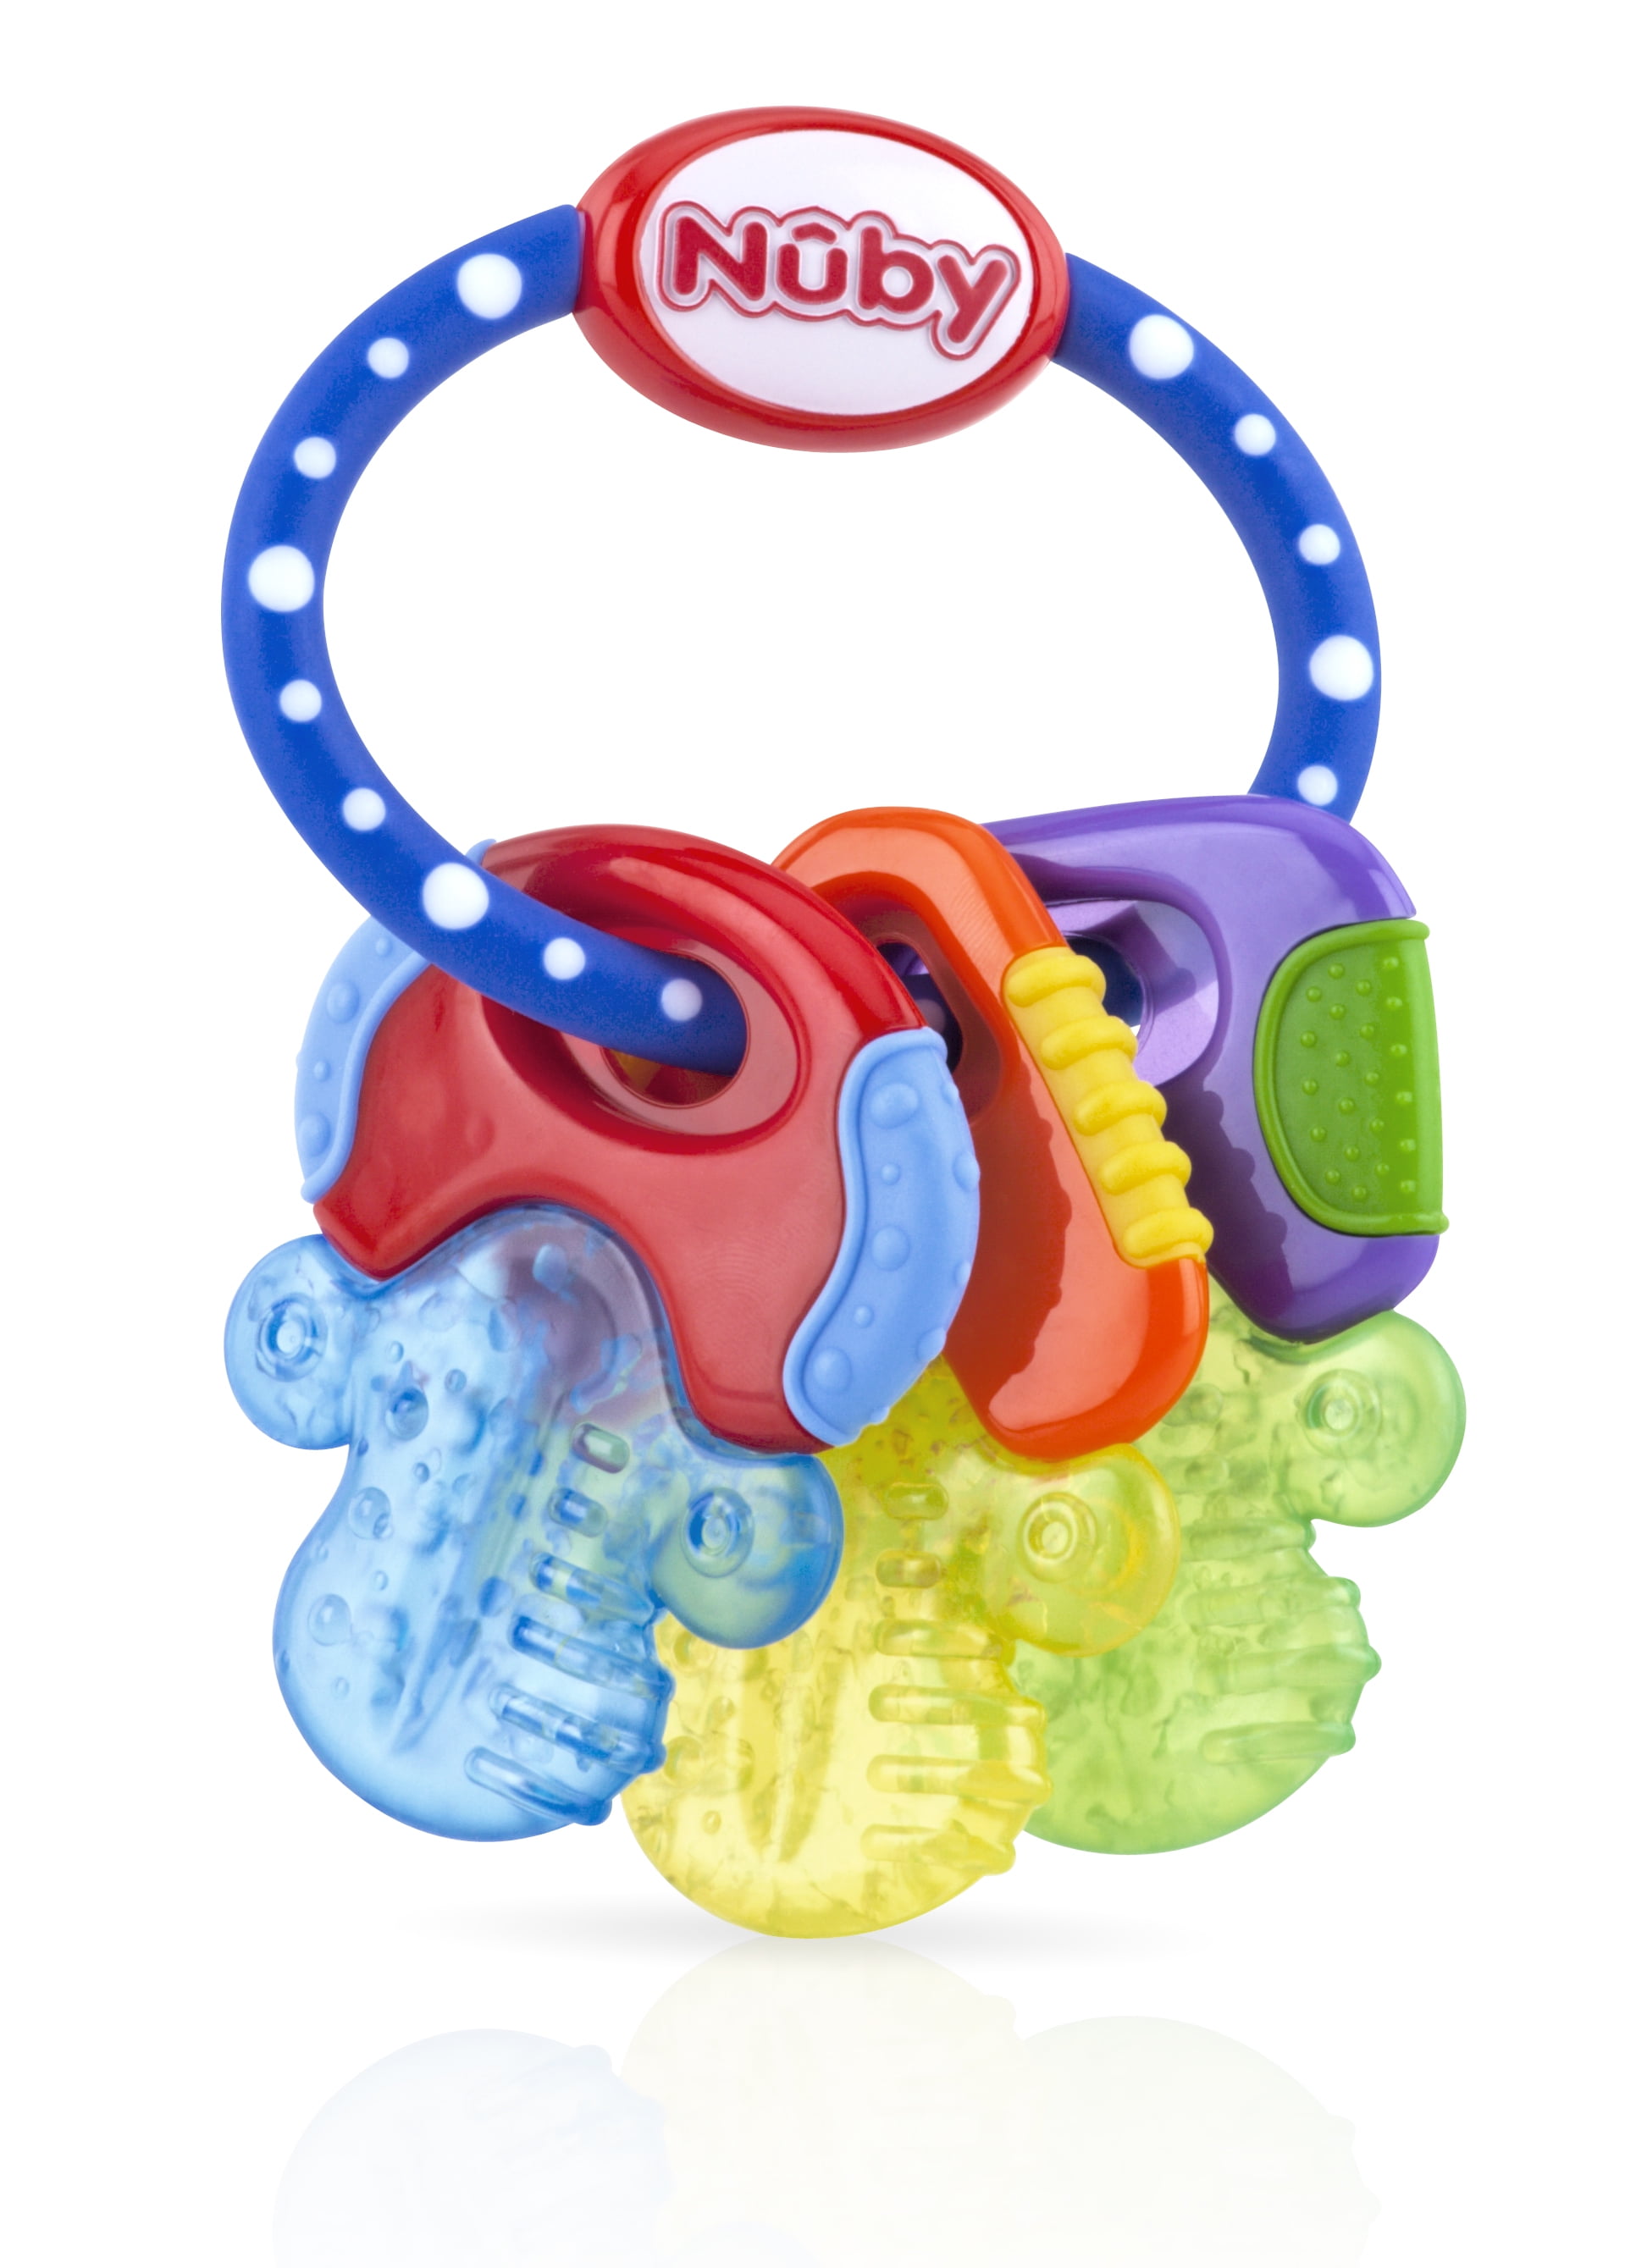 Pack of 2 The First Years 5 Brightly Color Key Teether Dishwash Safe Baby Toy 